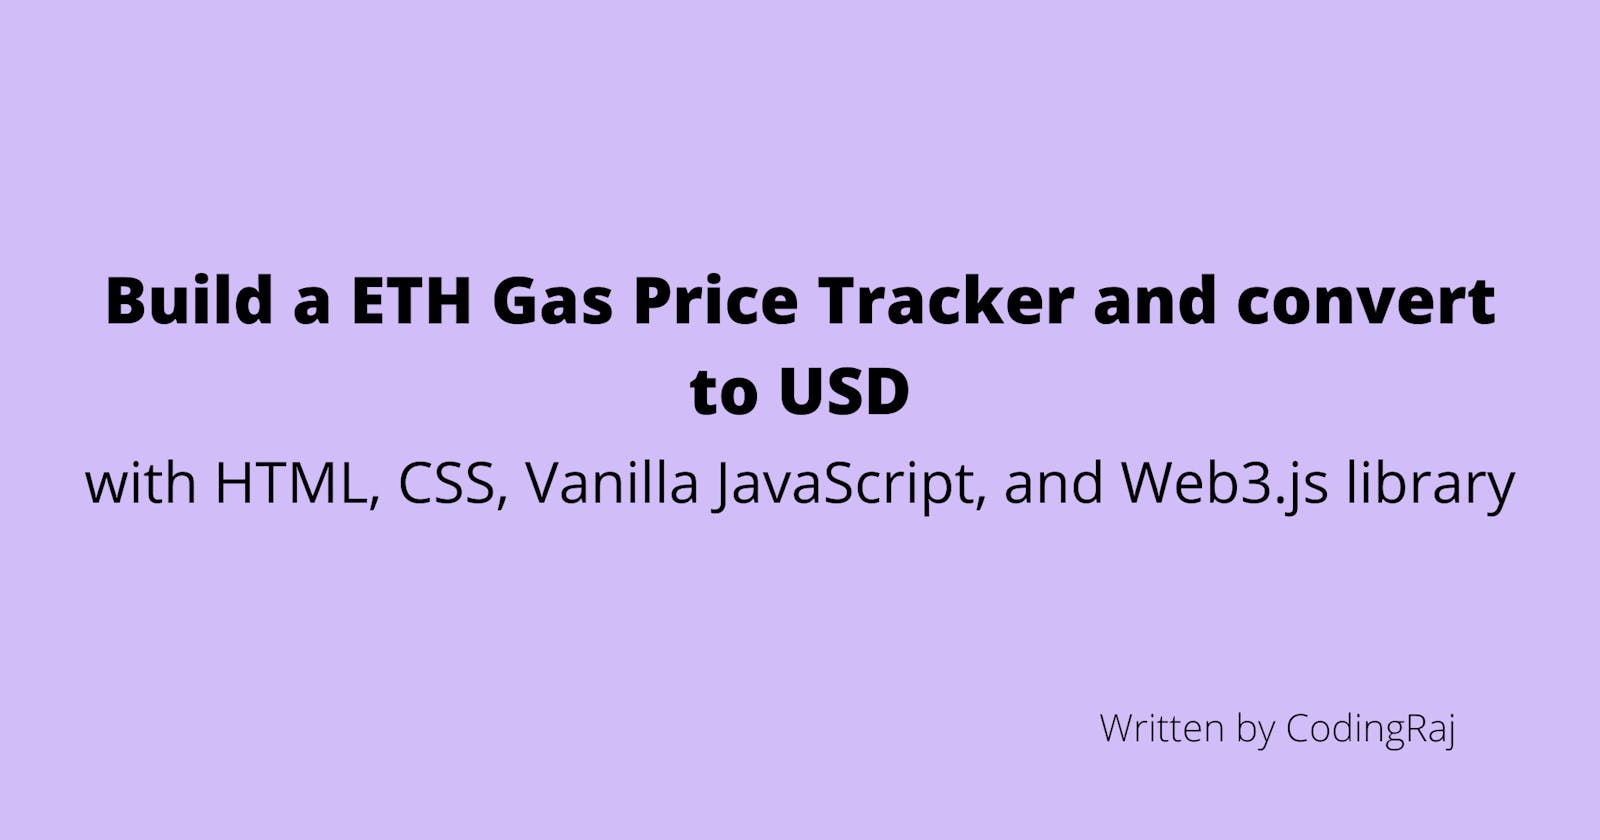 Build a ETH Gas Price Tracker and convert to USD with HTML, CSS, Vanilla JavaScript, and Web3.js library